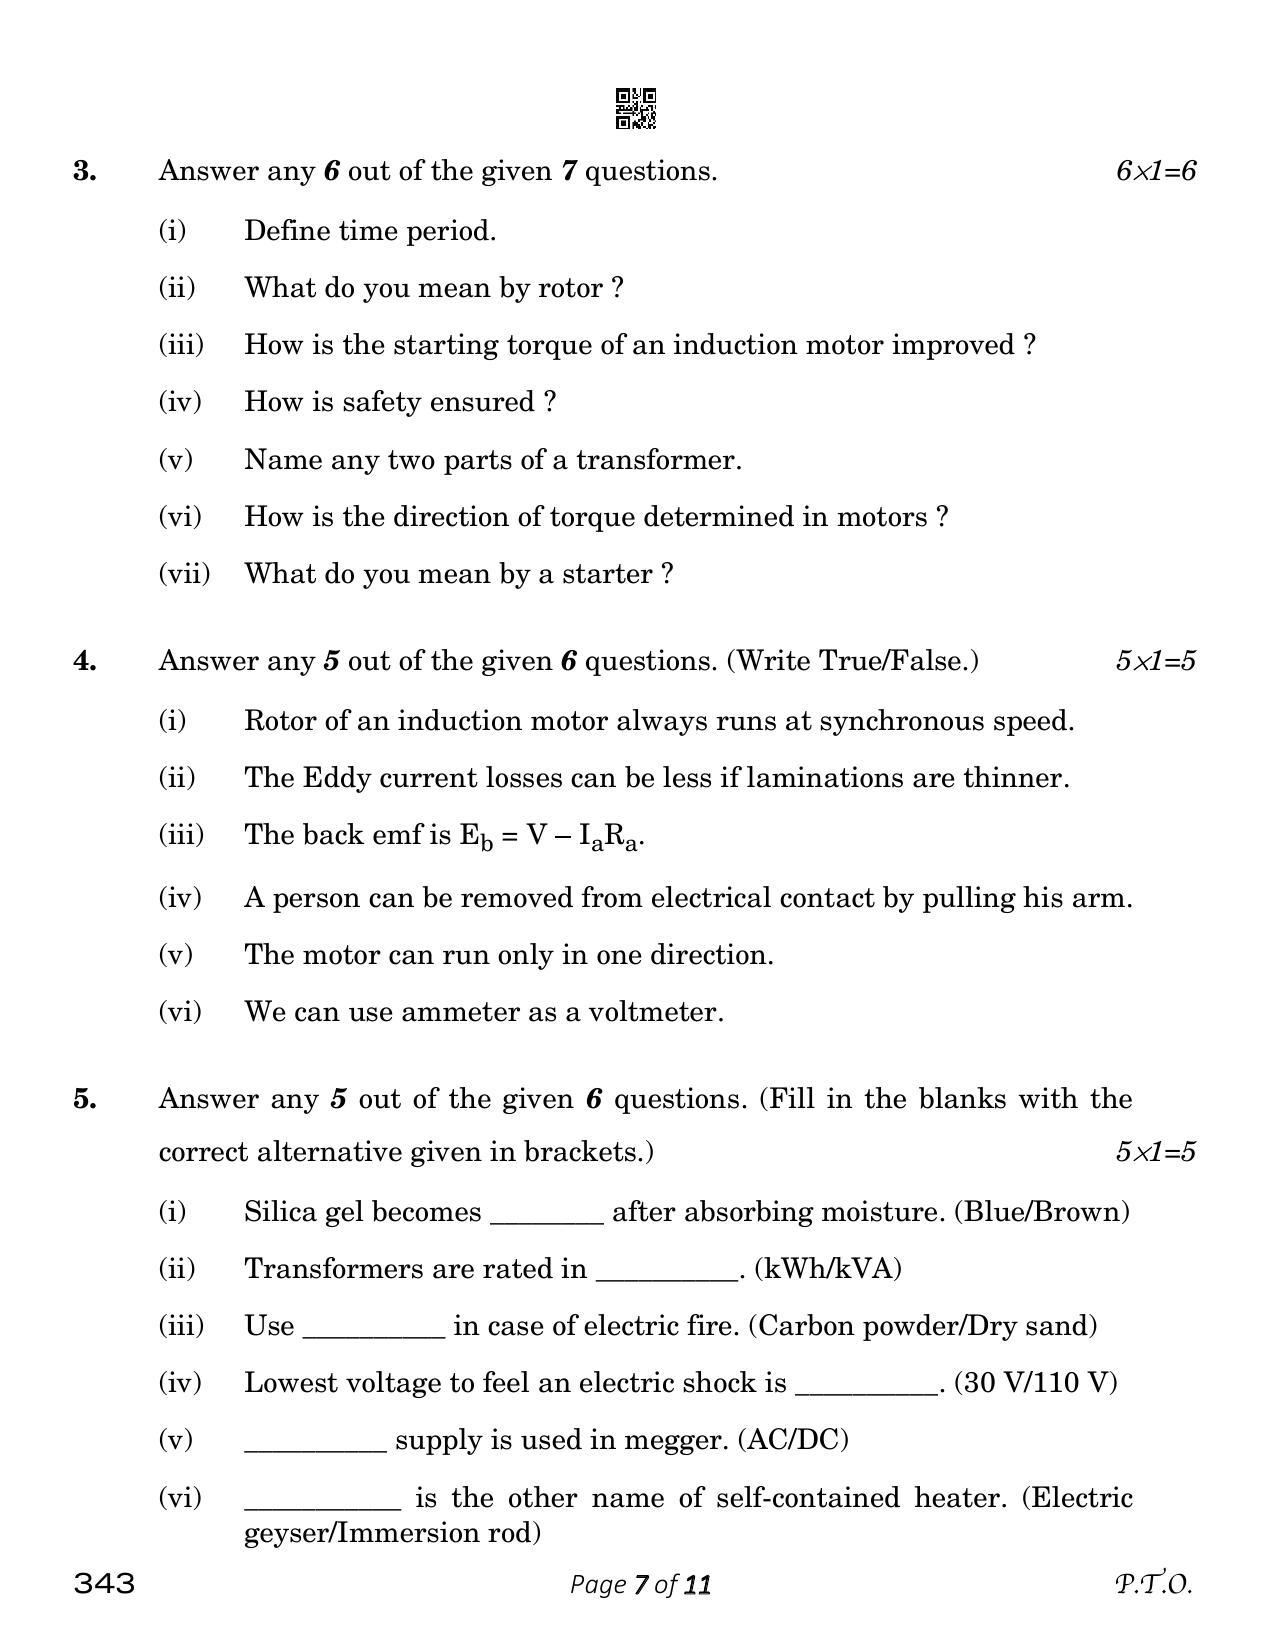 CBSE Class 12 Electrical Technology (Compartment) 2023 Question Paper - Page 7